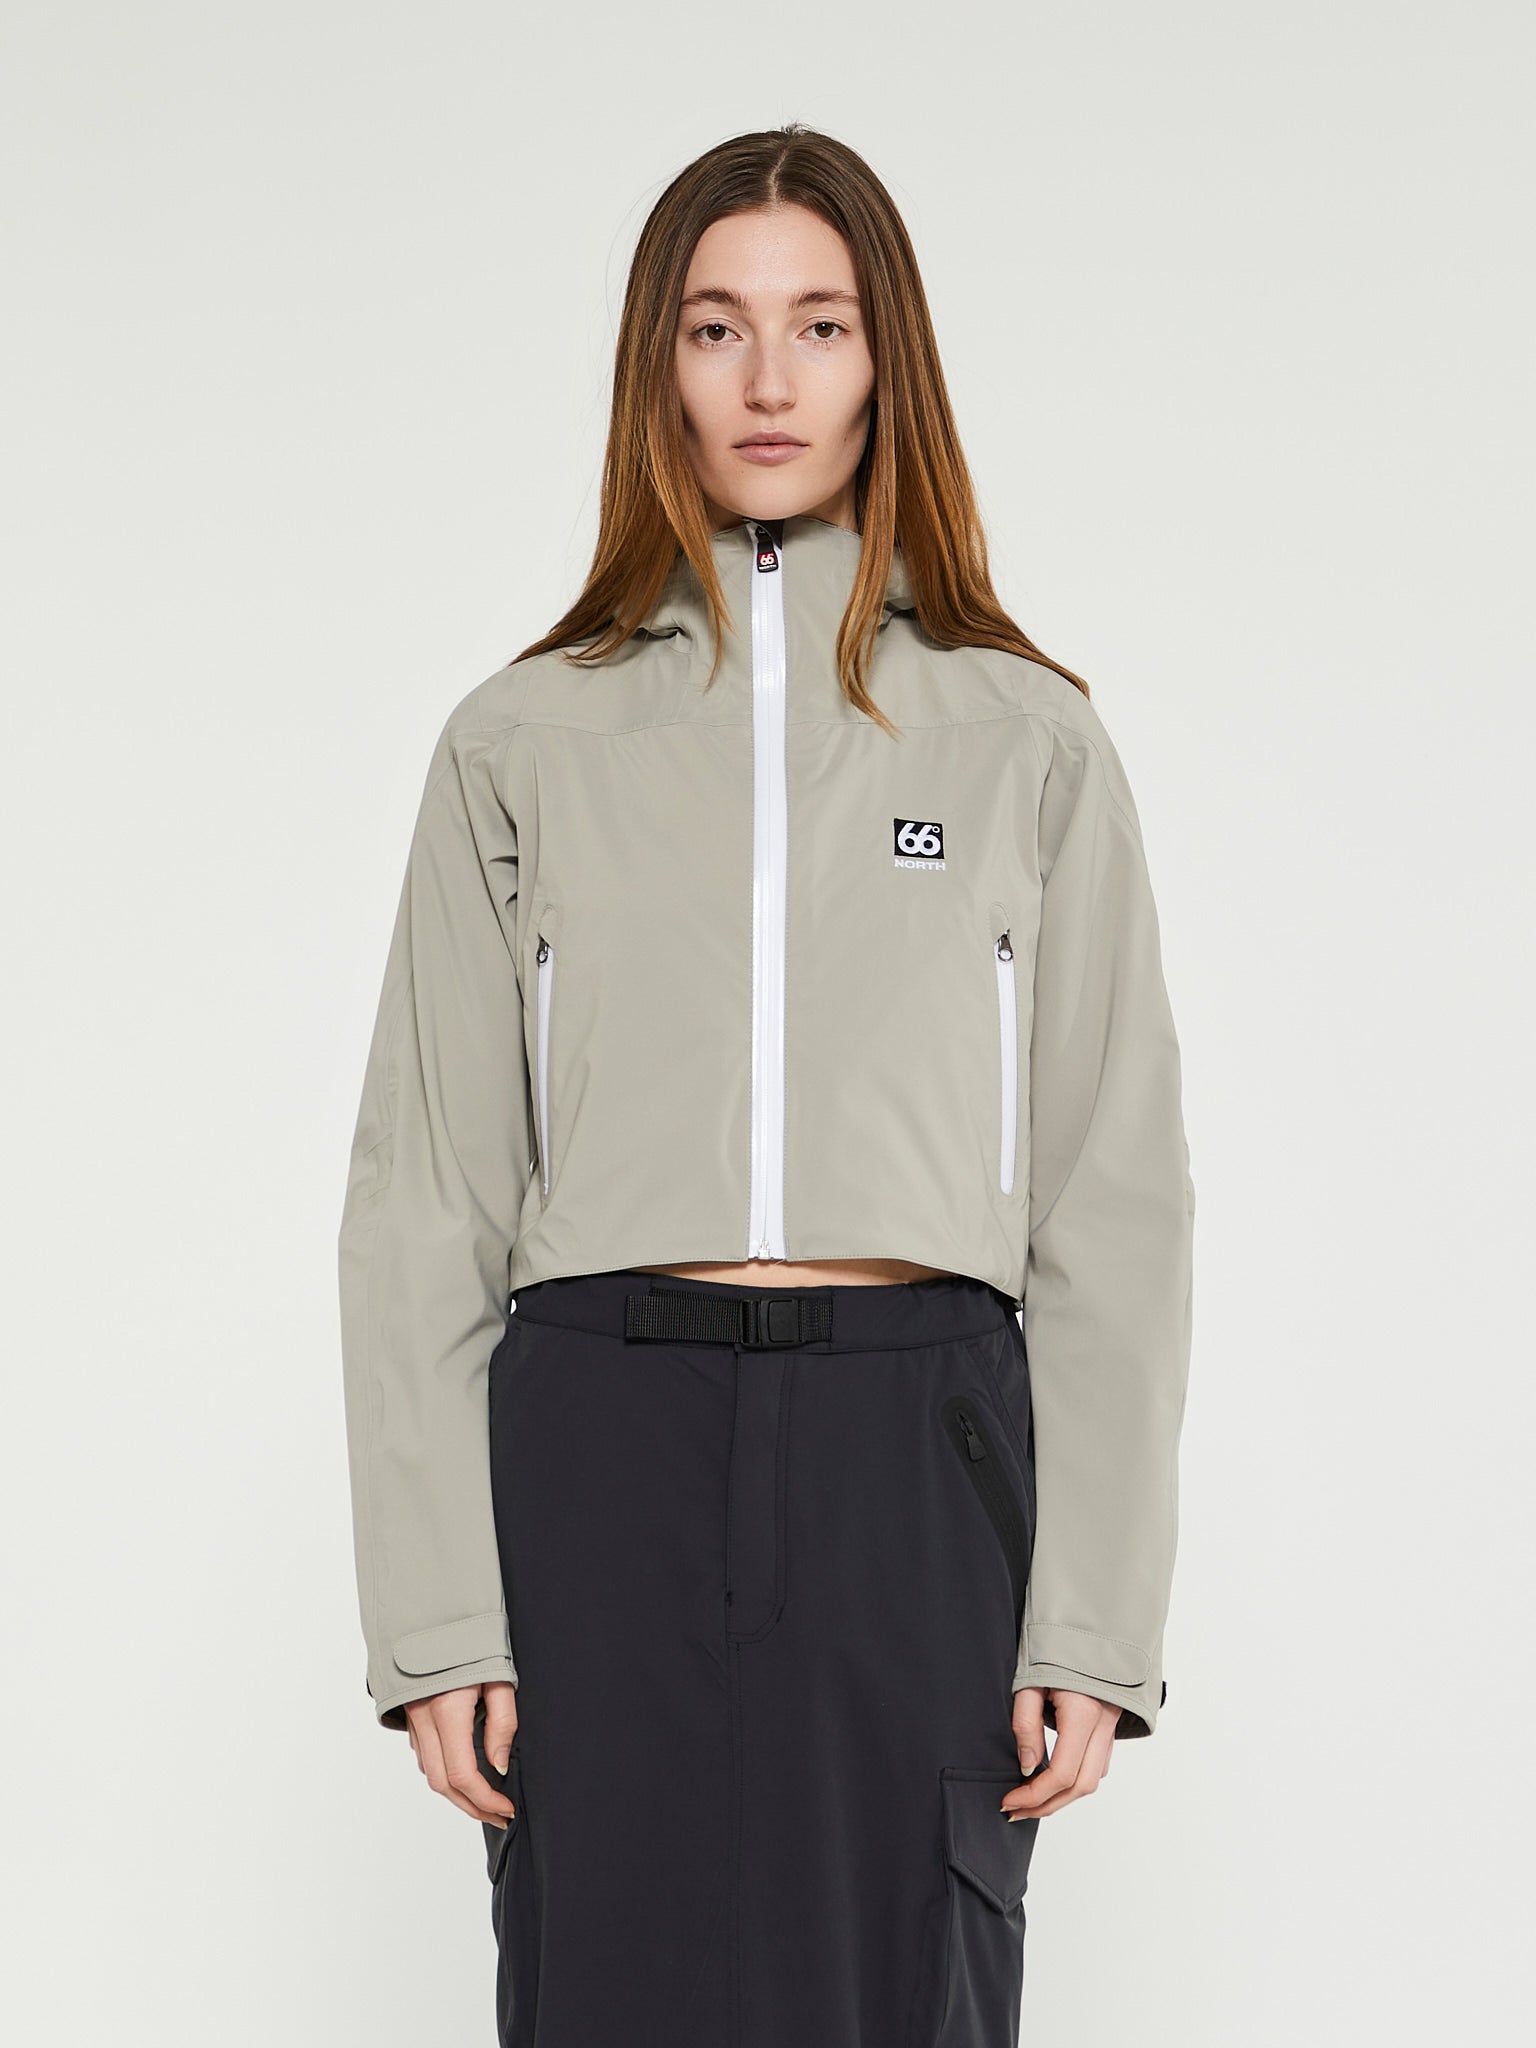 66 North - Snaefell W Cropped Jacket in Grey